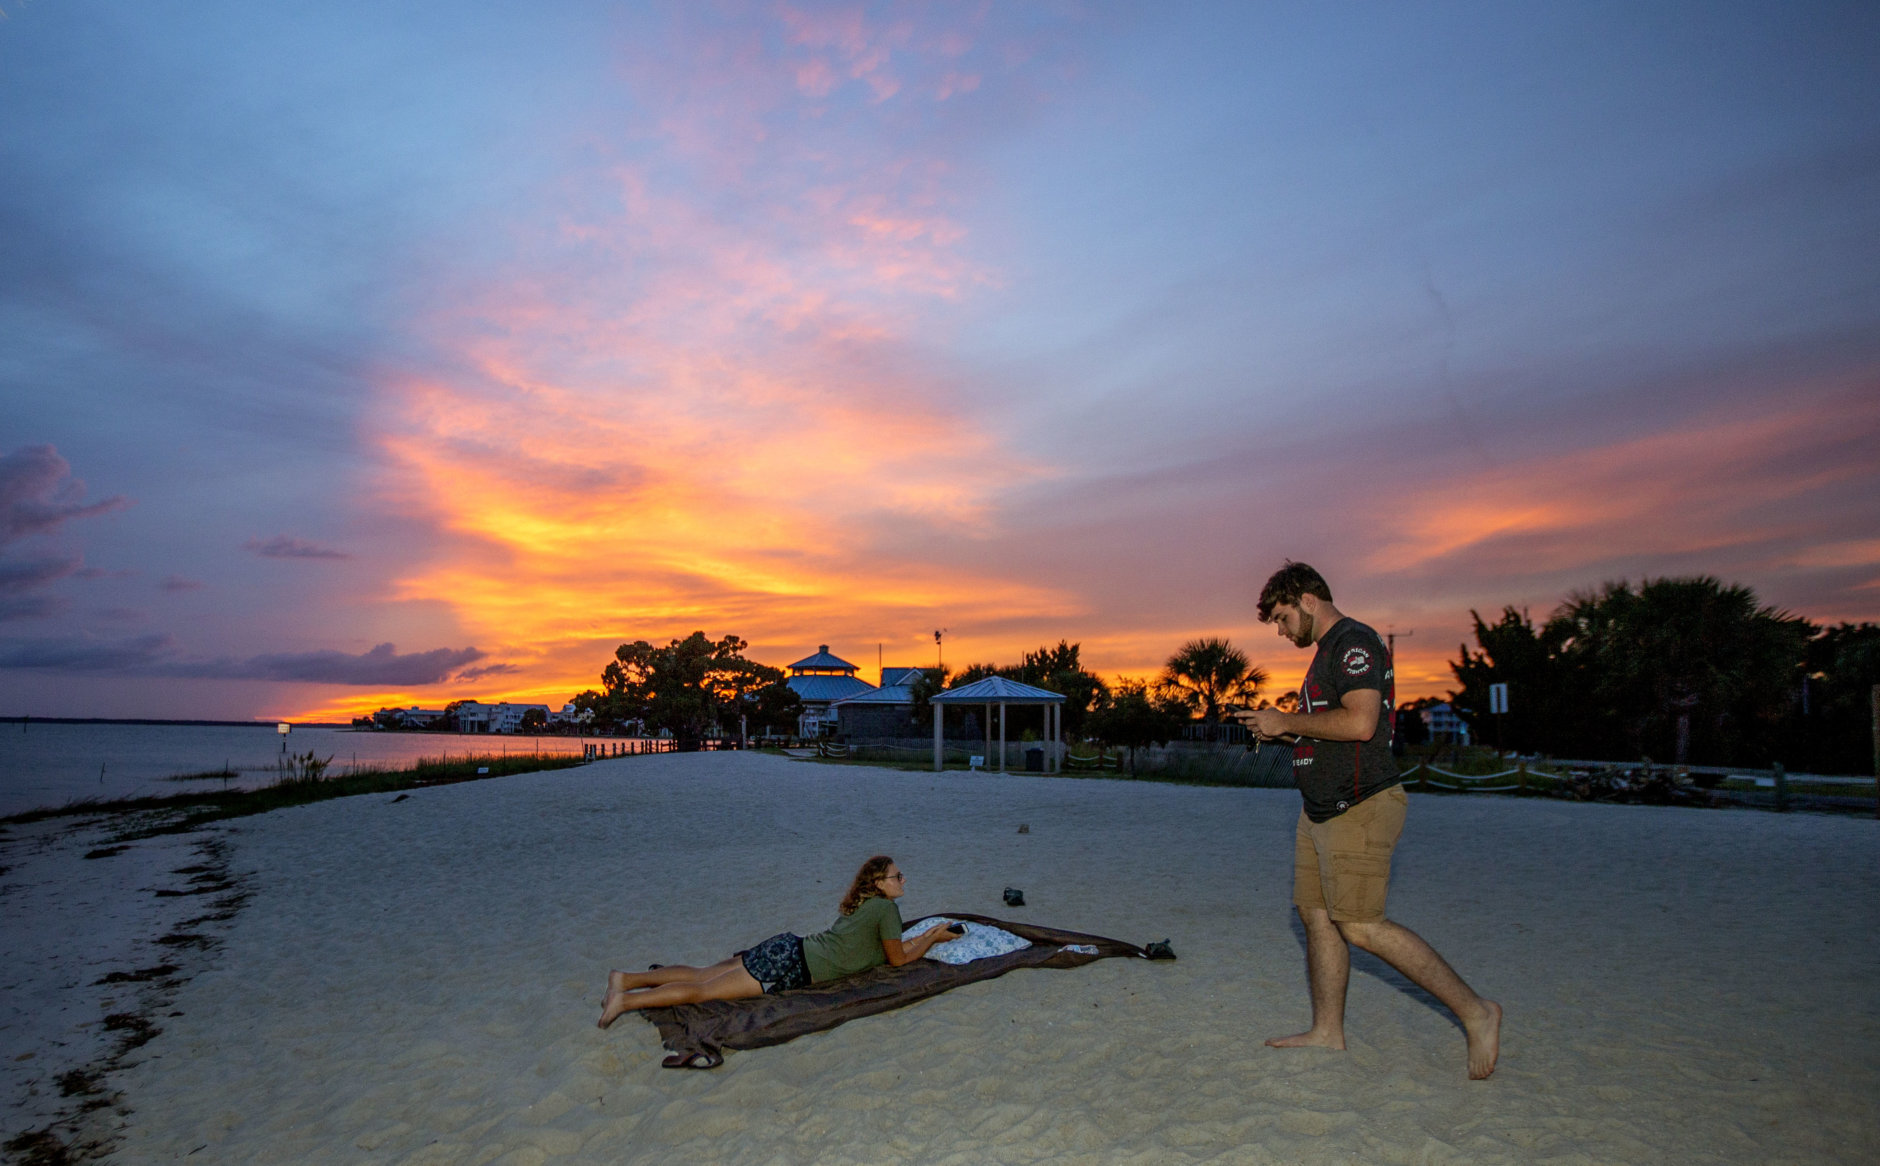 CRAWFORDVILLE, FL - OCTOBER 09: Tad West and Caitlyn Martin hang out on an empty Shell Point Beach as the sun set prior to the arrival of Hurricane Michael on October 9, 2018 in Crawfordville, Florida. Shell Point Beach is 30 miles south of Tallahassee. Florida. Hurricane Michael, which strengthened to a Category 3 storm today with sustained winds of 120 mph, is expected to make landfall in the Florida Panhandle by Wednesday. (Photo by Mark Wallheiser/Getty Images)